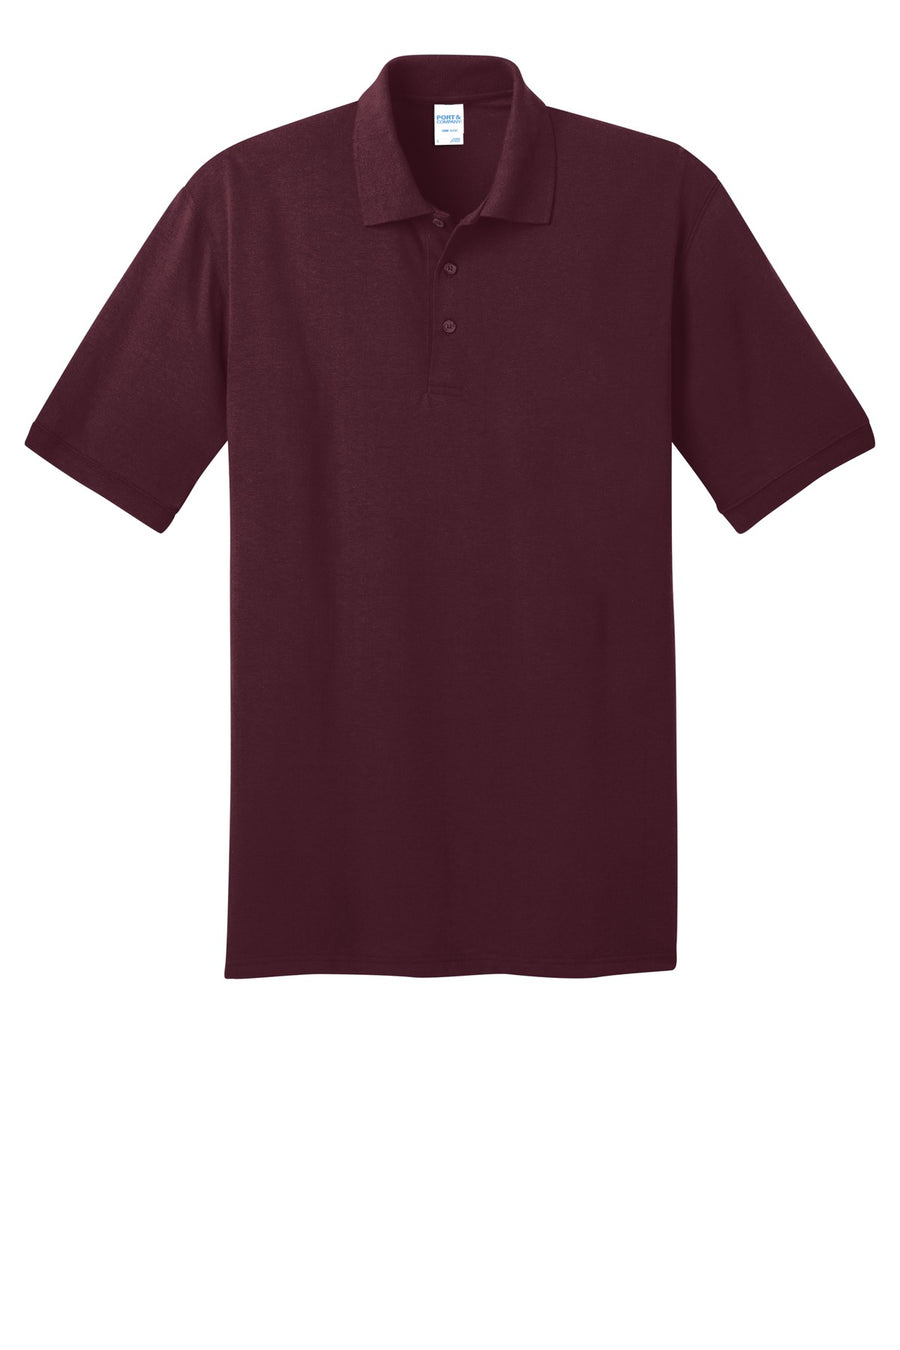 KP55T-Athletic Maroon-front_flat